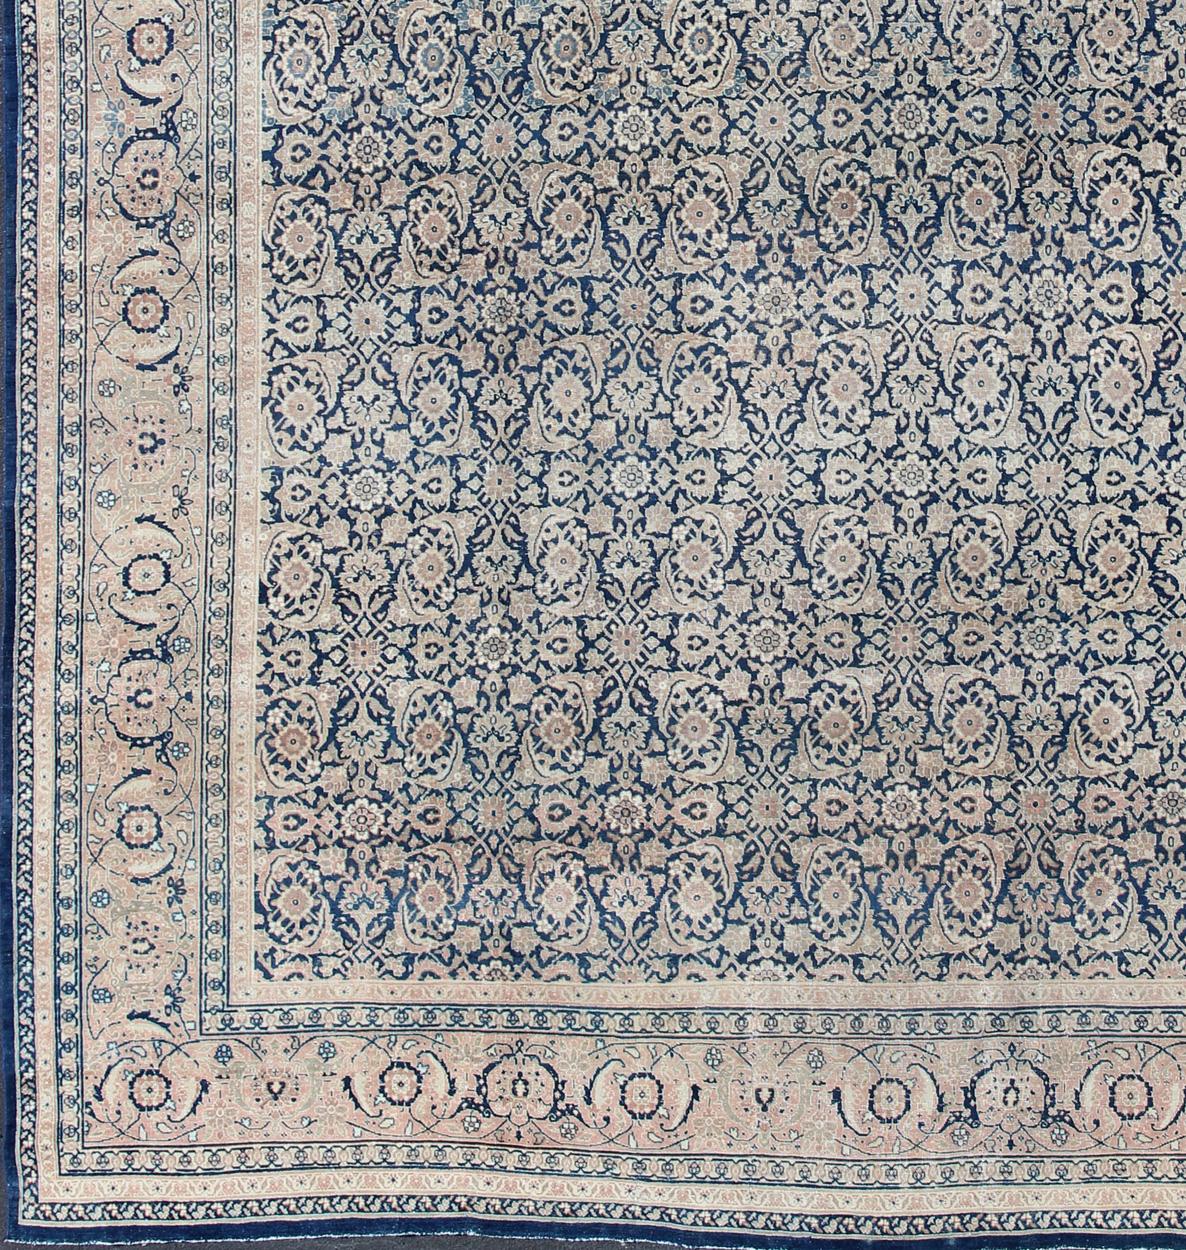 Hand-Knotted Antique Persian Tabriz Carpet with Geometric Herati Design in Dark Blue Tones For Sale